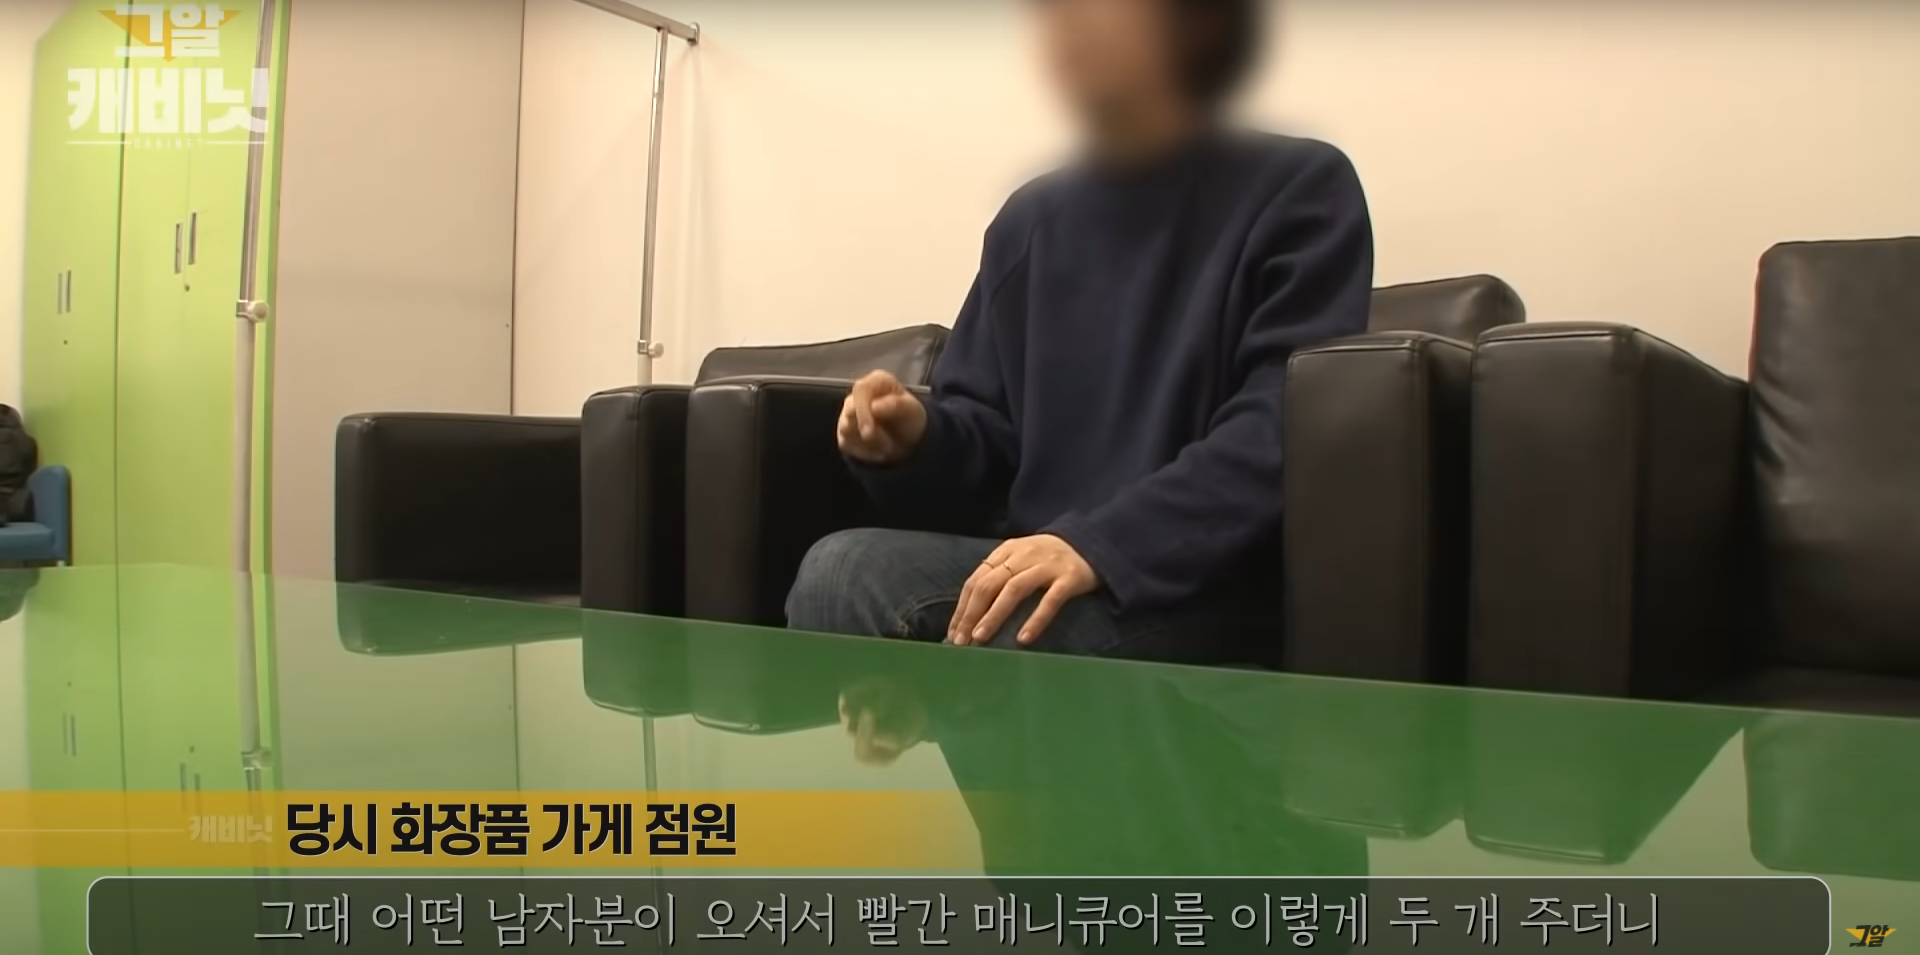 unsolved crimes in korea - witness